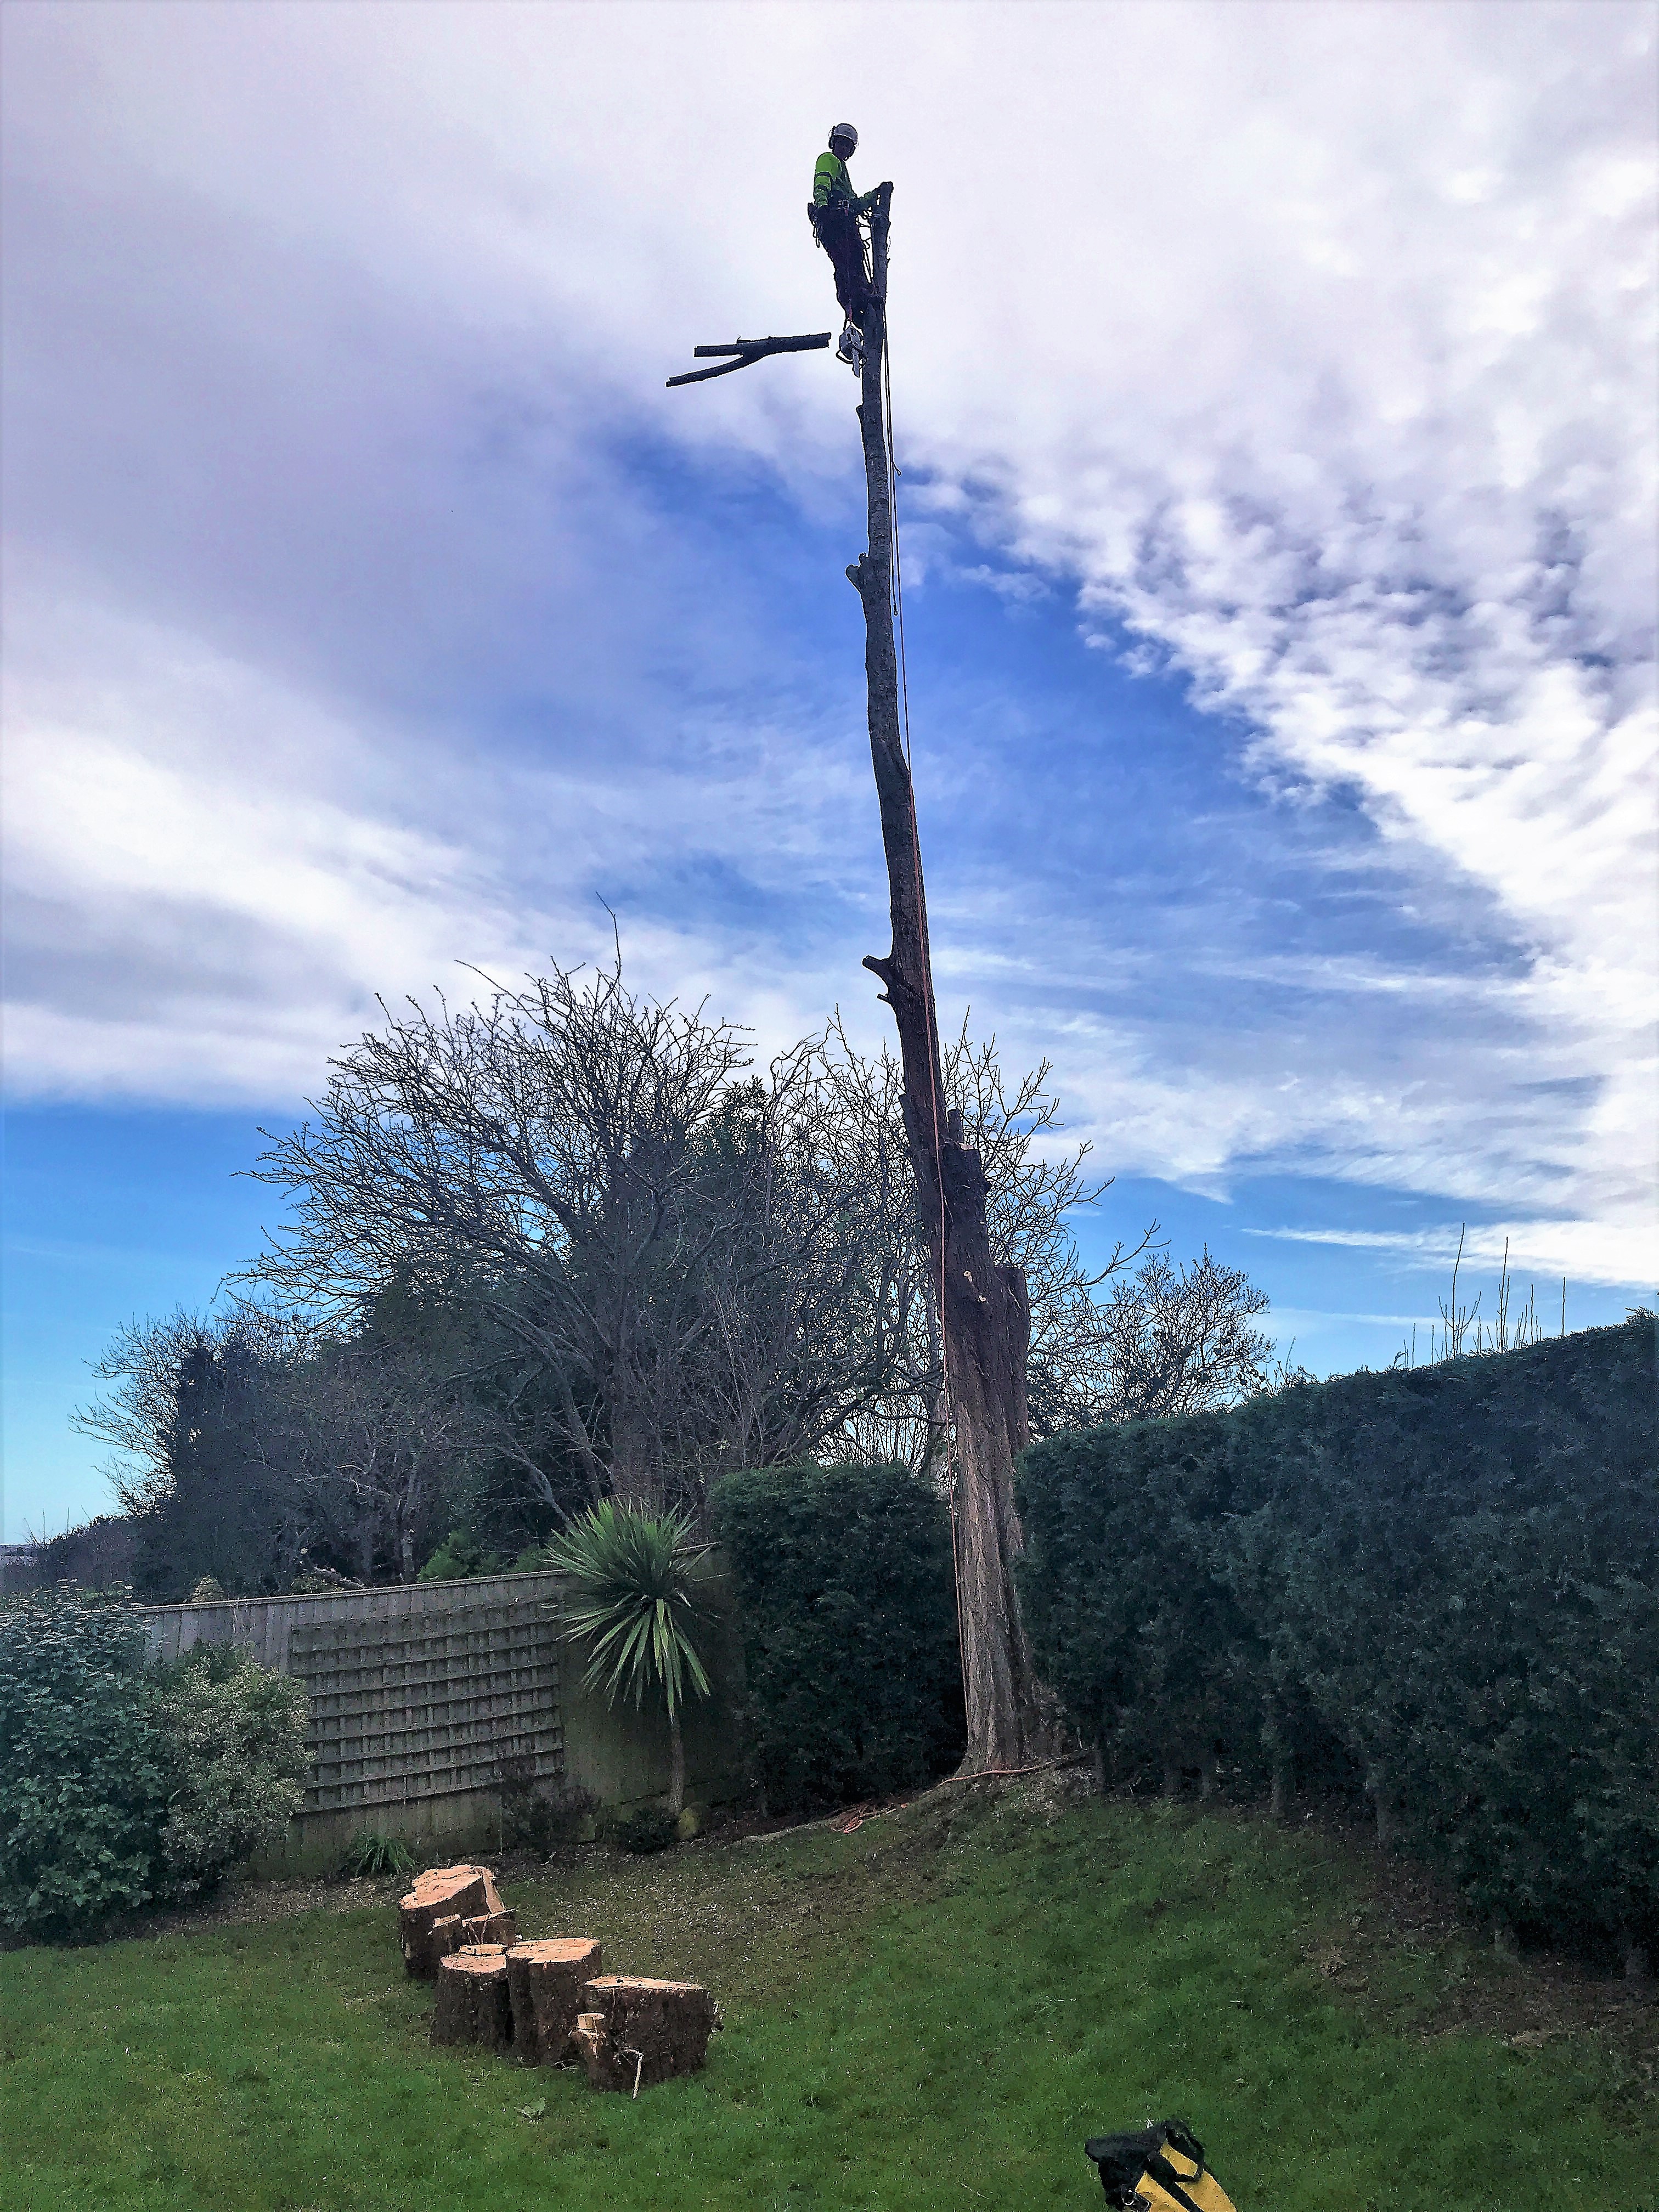 Weymouth Tree Surgeon - Tree Surgery, Hedge, trimming, reduction, removal and stump grinding | Dorset Treeworx Ltd.